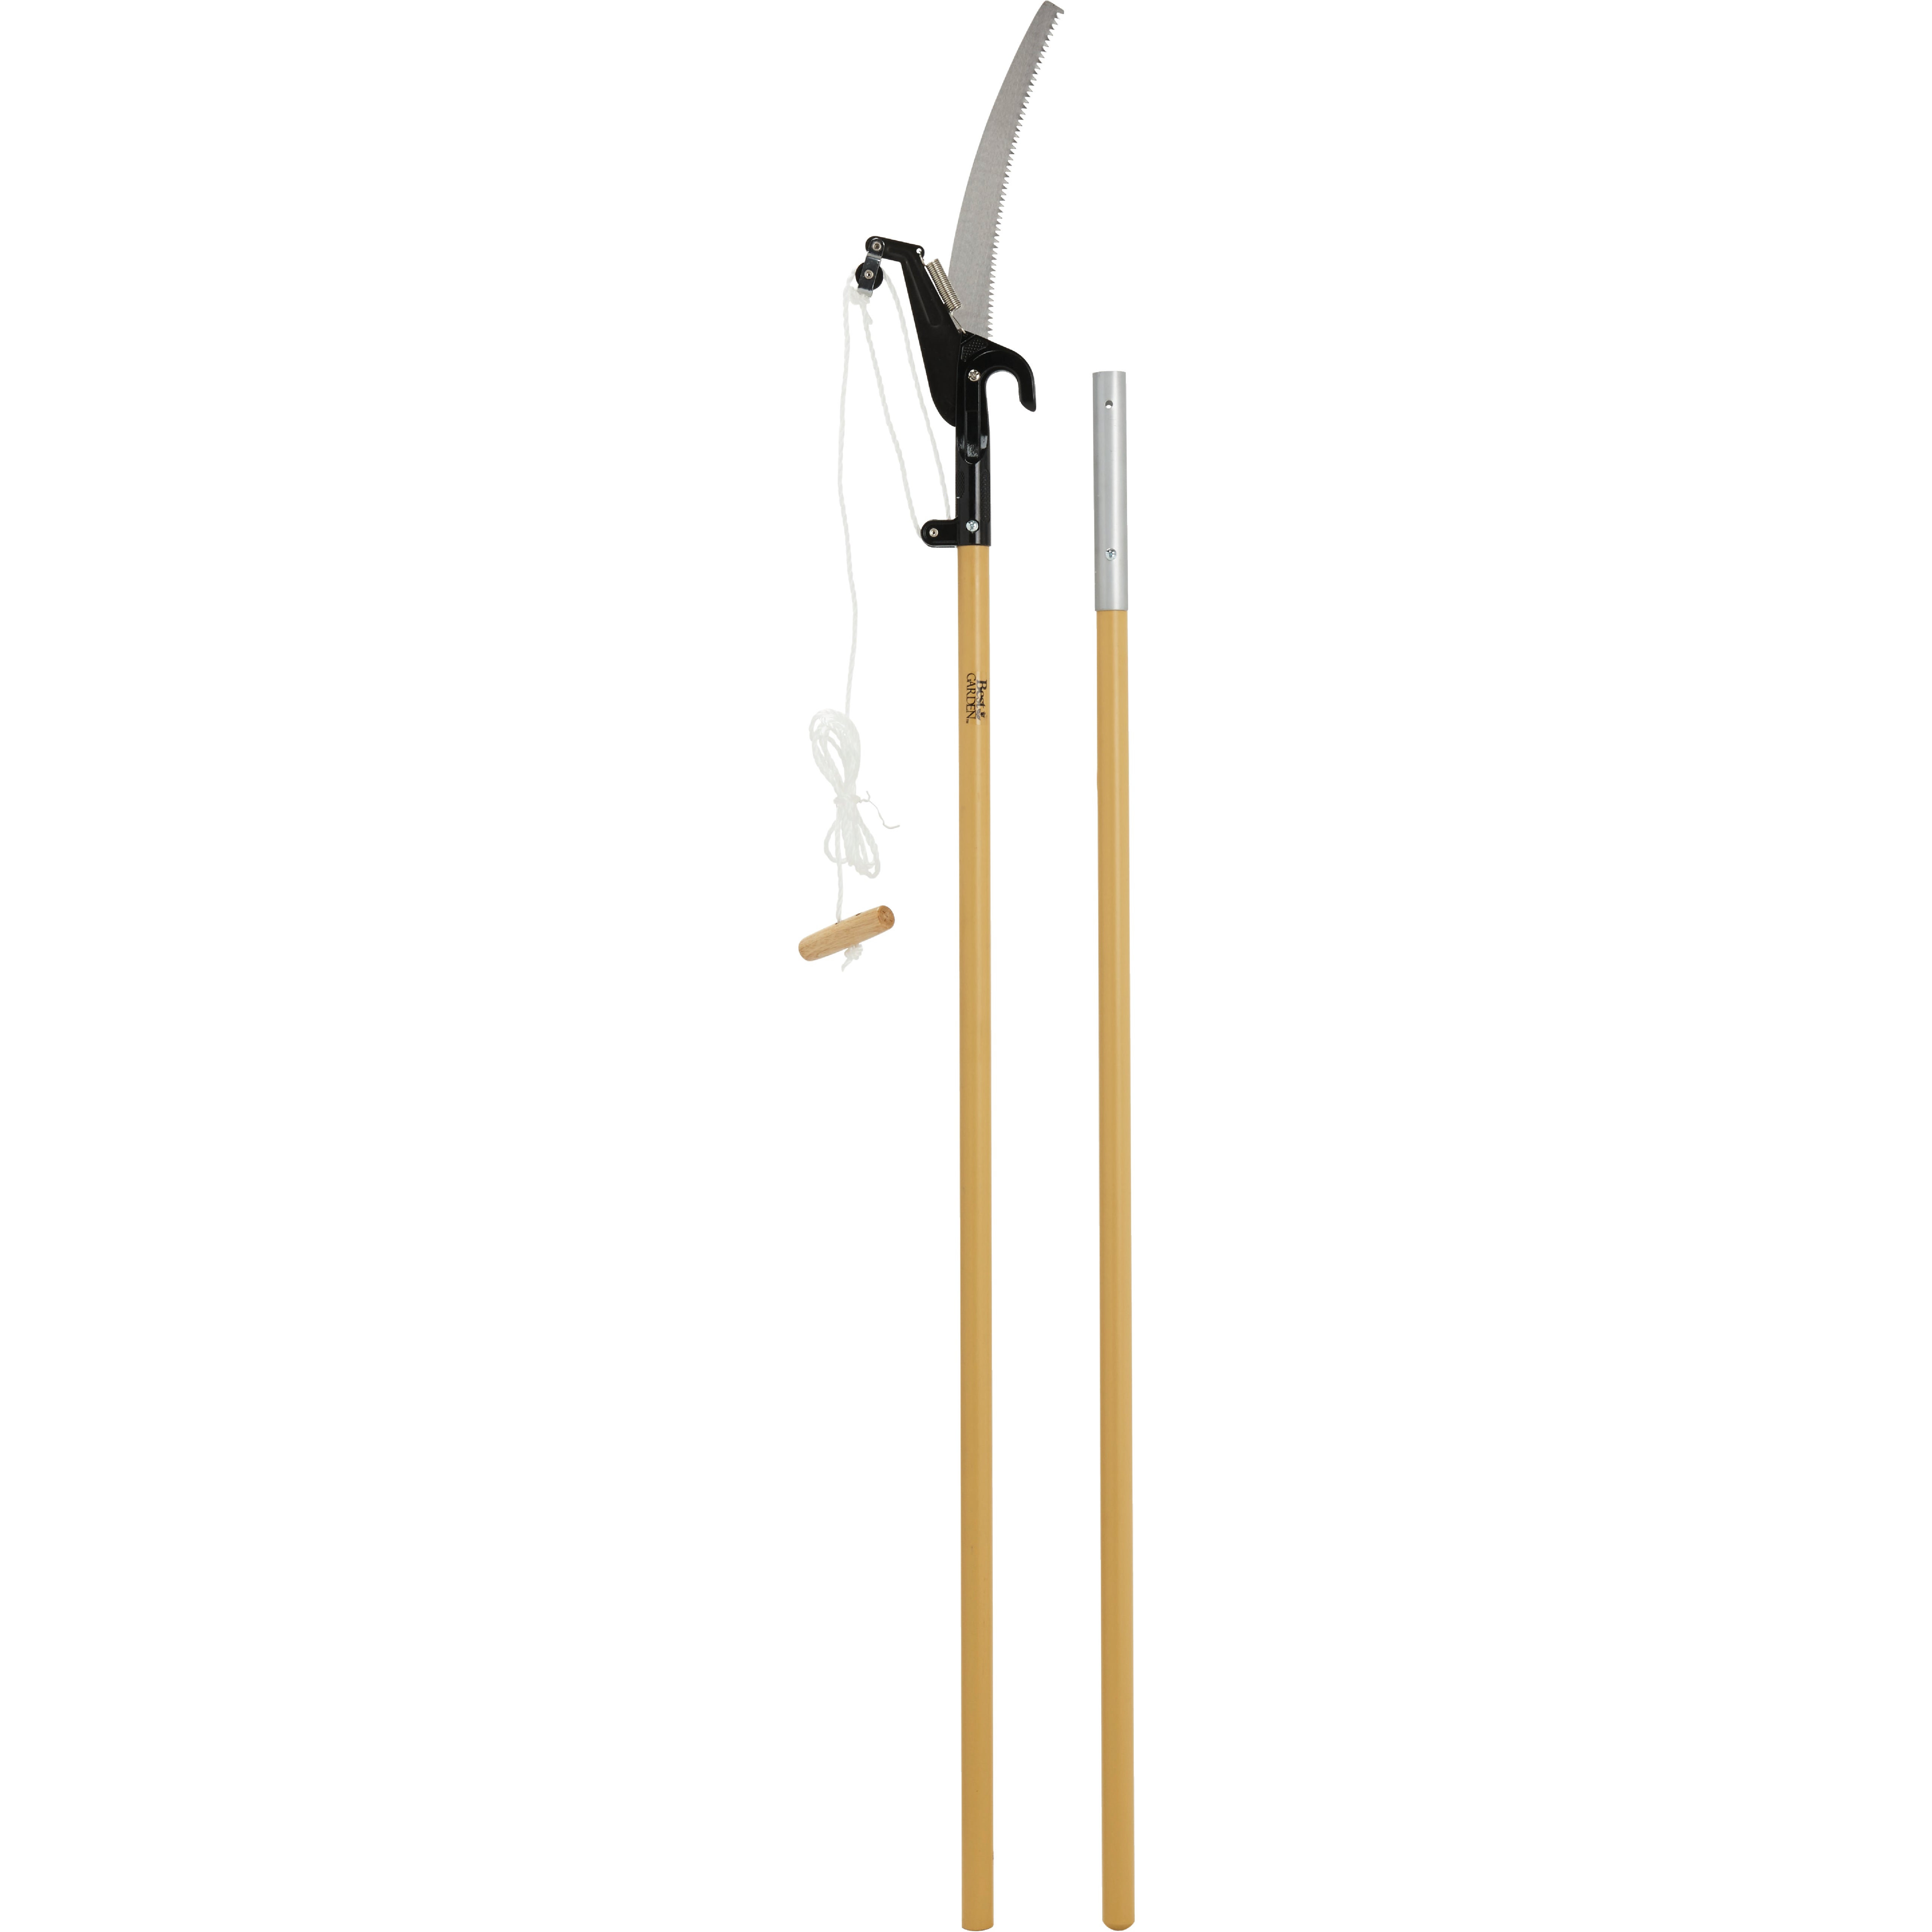 Best Garden 1 In. Cutting Capacity 8 Ft. Wood Pole Tree Pruner M4ATWS1 - image 3 of 3